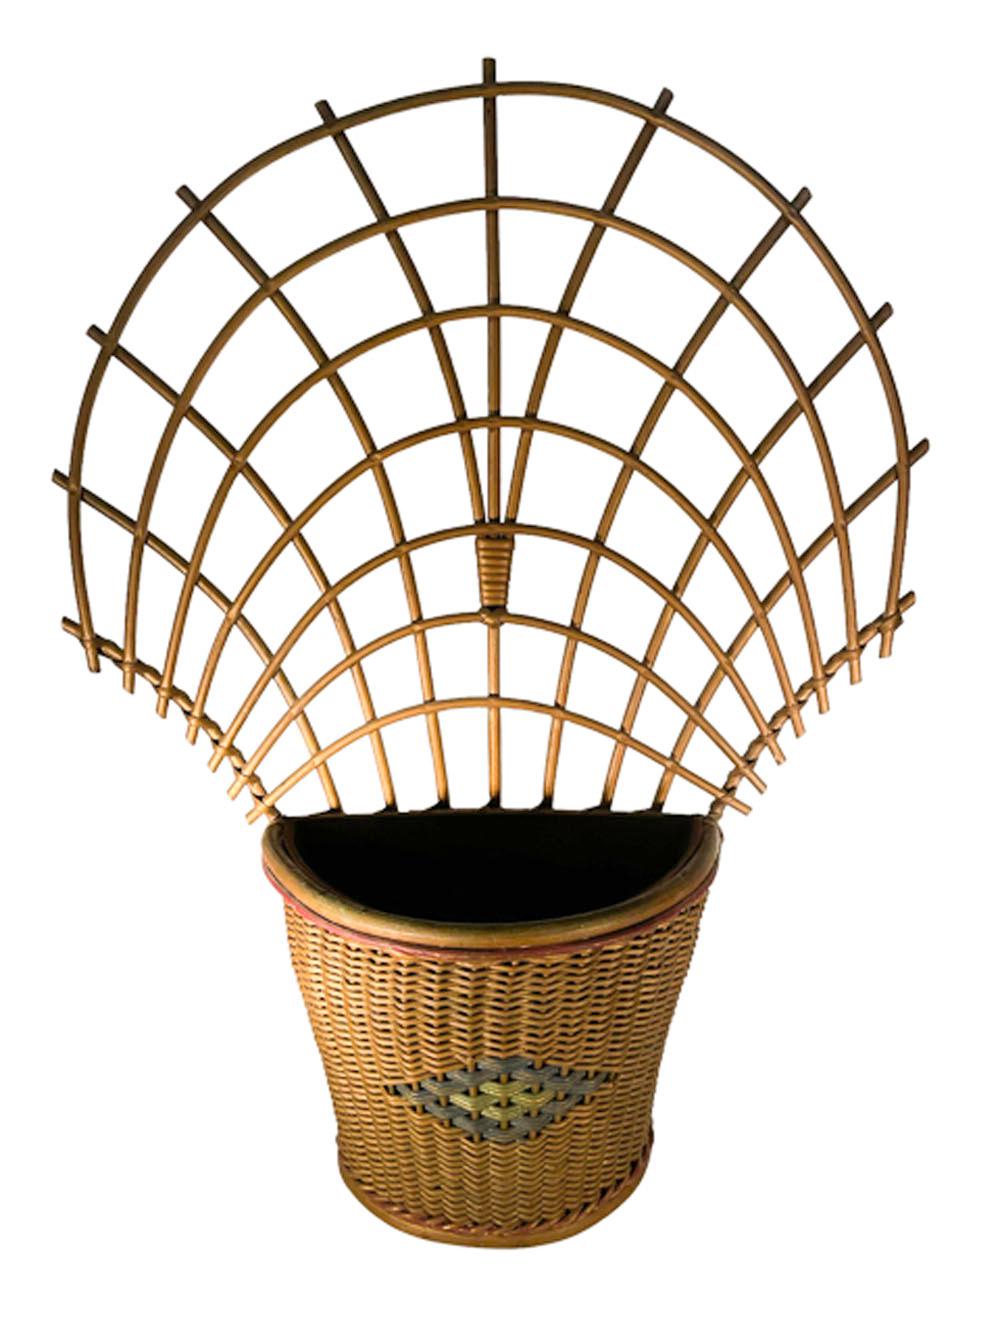 Pair of American Art Deco wicker wall-hung planters retaining their original bronze painted finish with red, blue and green accents. Half round tapered planters of tightly woven cane with a central stylized woven diamond painted blue and green and